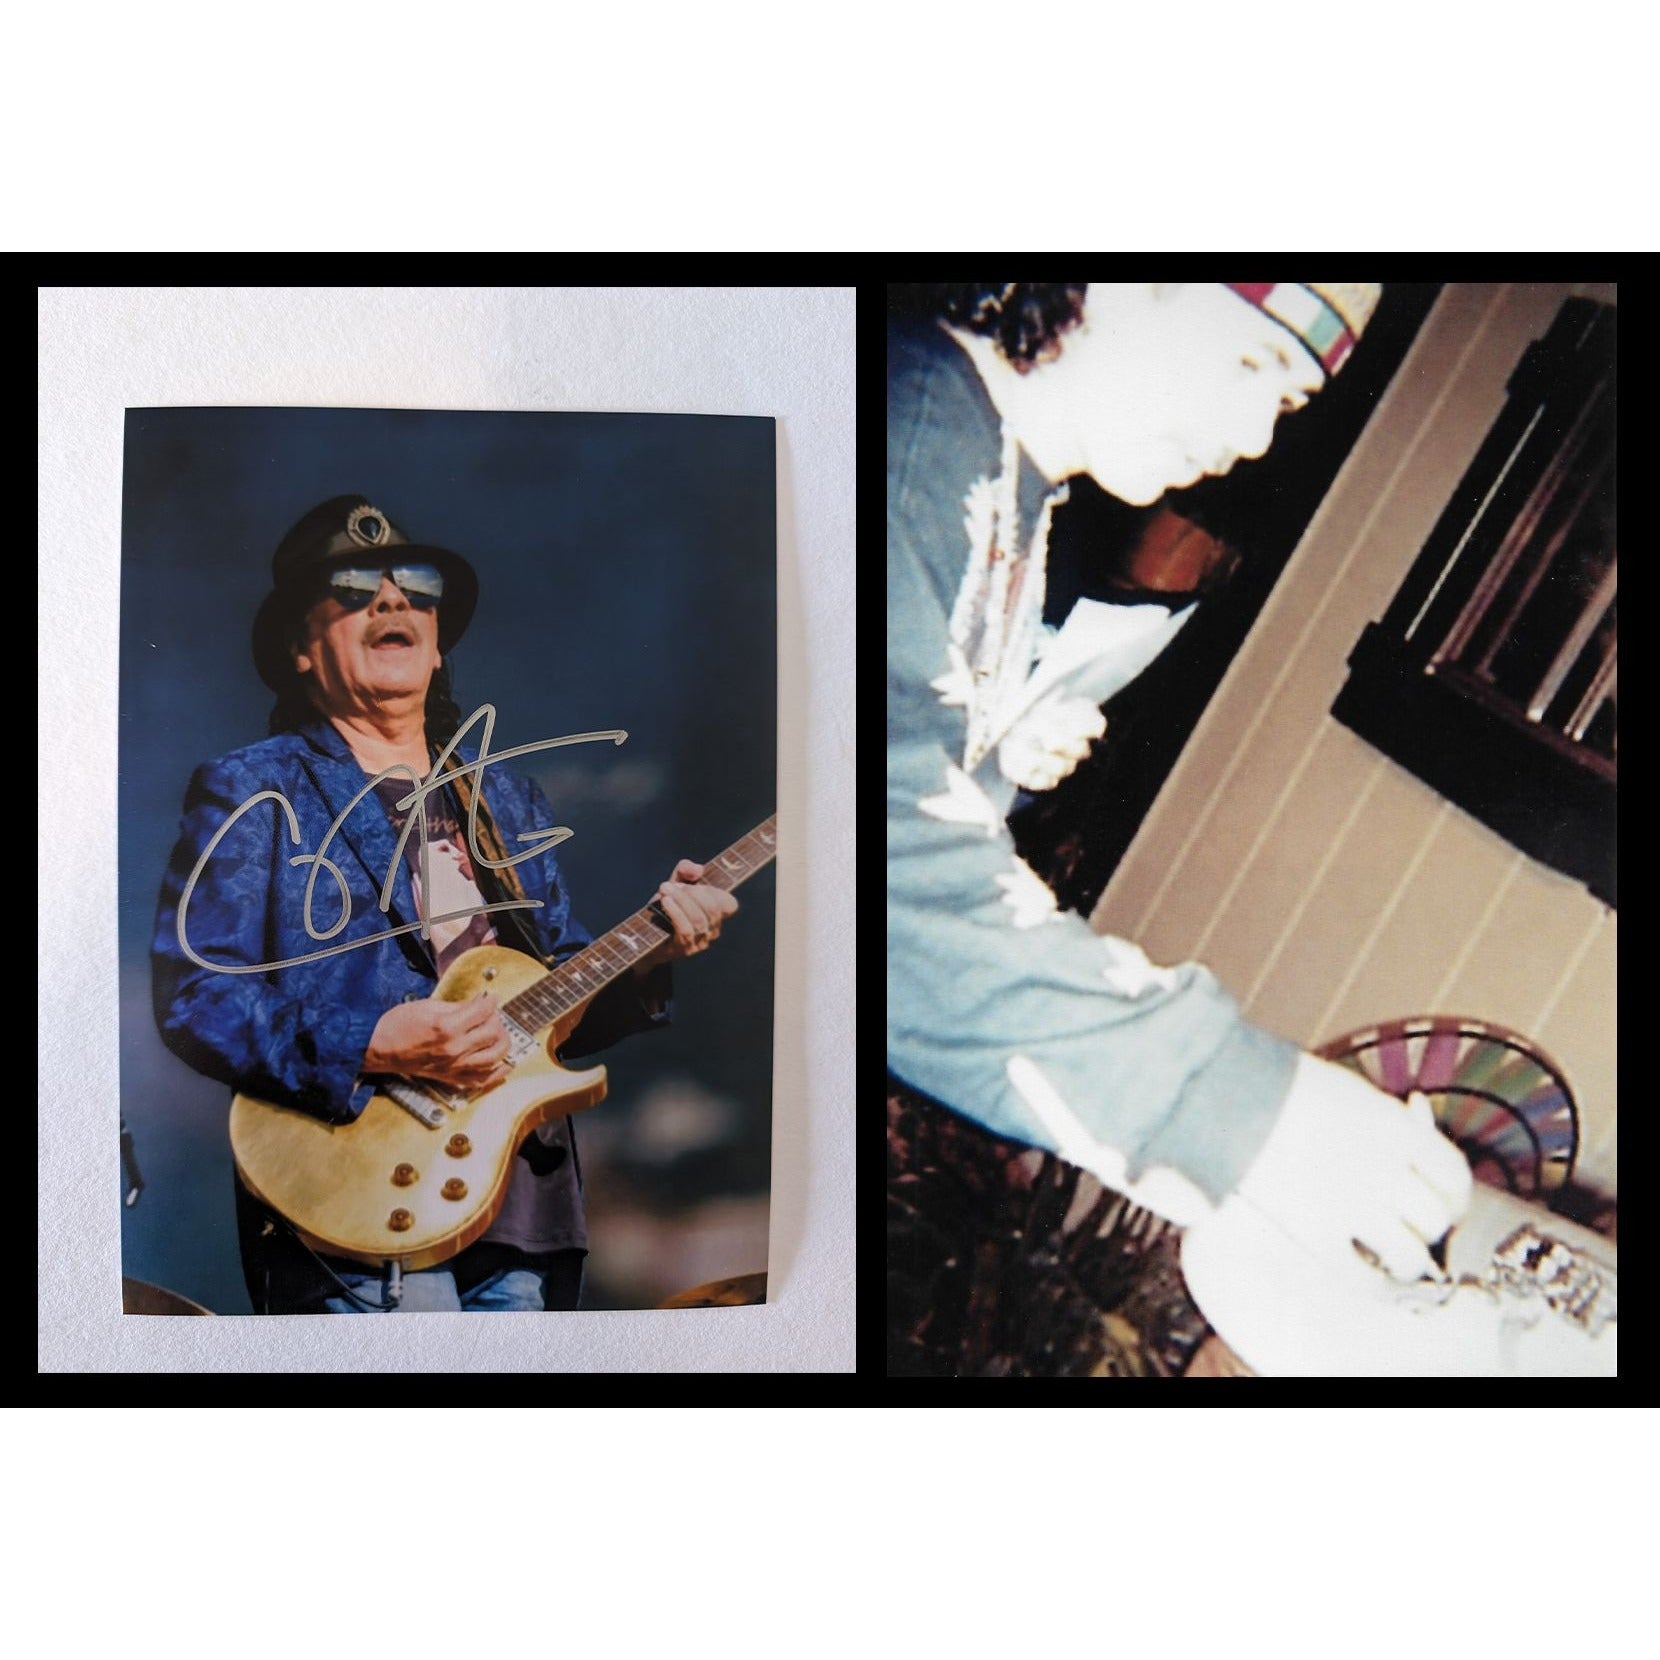 Carlos Santana 5x7 photograph signed with proof